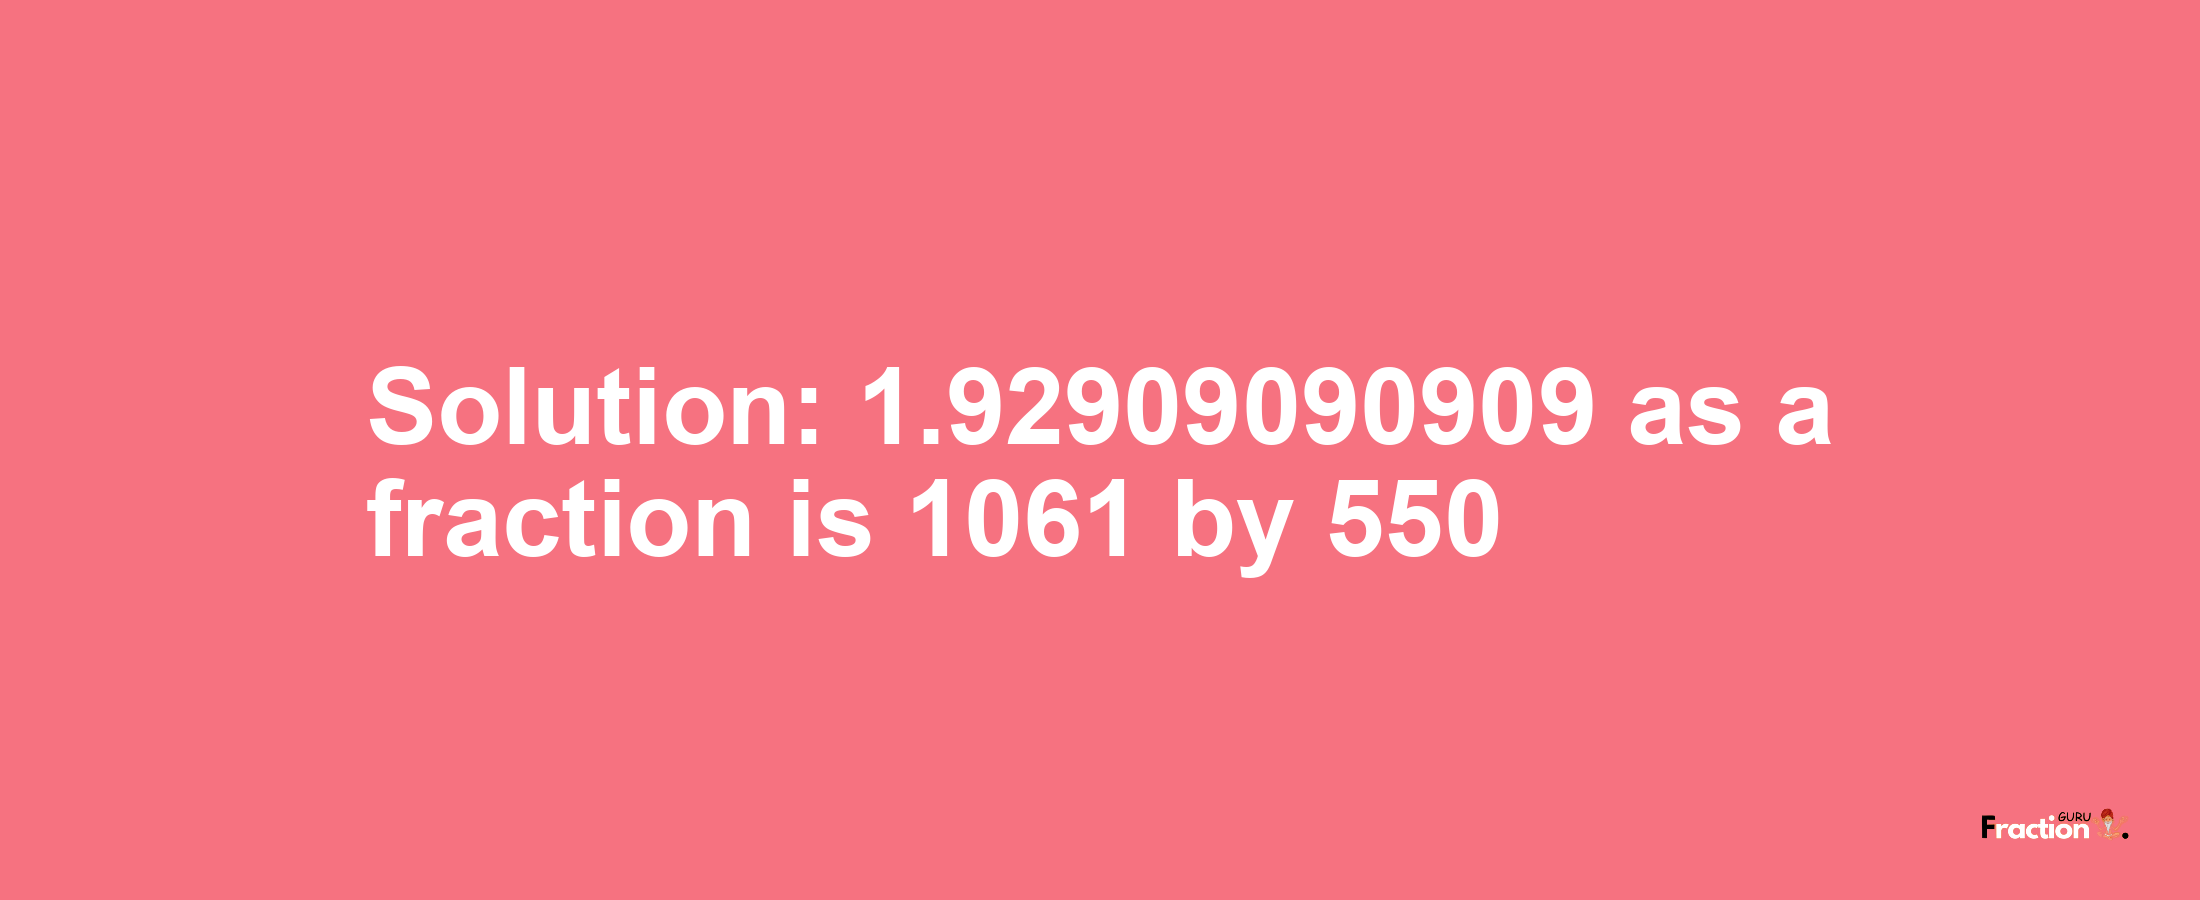 Solution:1.92909090909 as a fraction is 1061/550